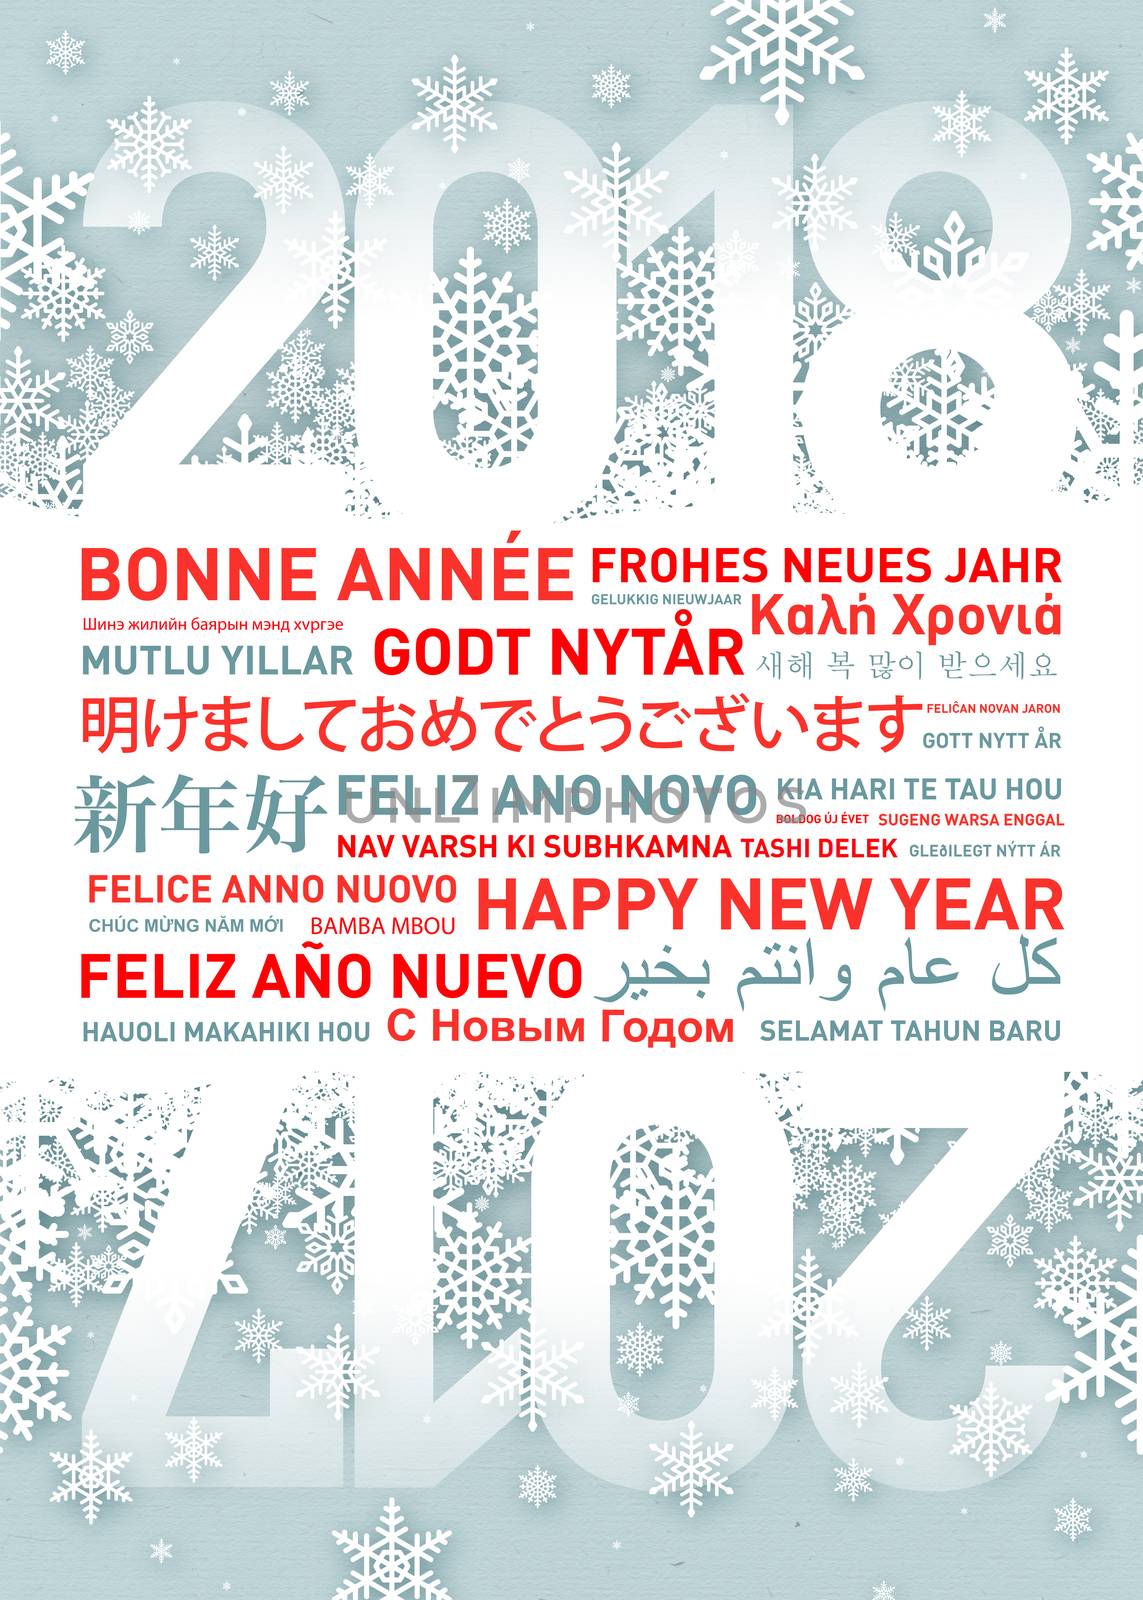 Happy new year greetings card from all the world by daboost